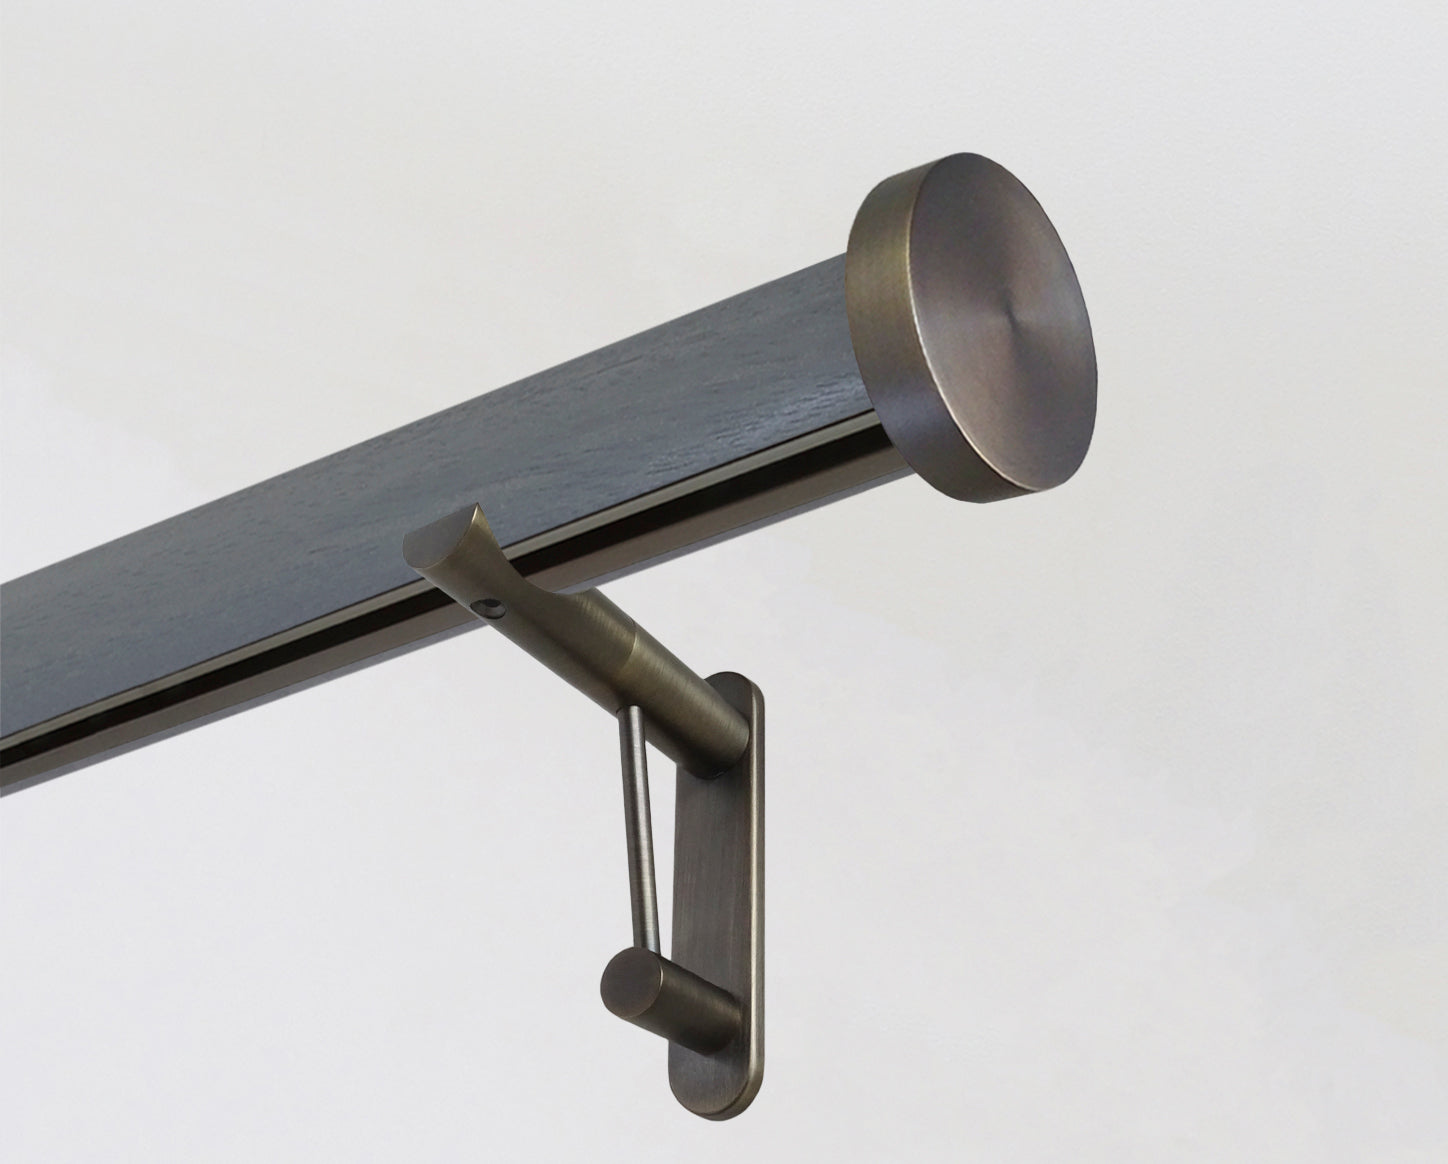 Dark grey tracked curtain pole with bronze end cap finials